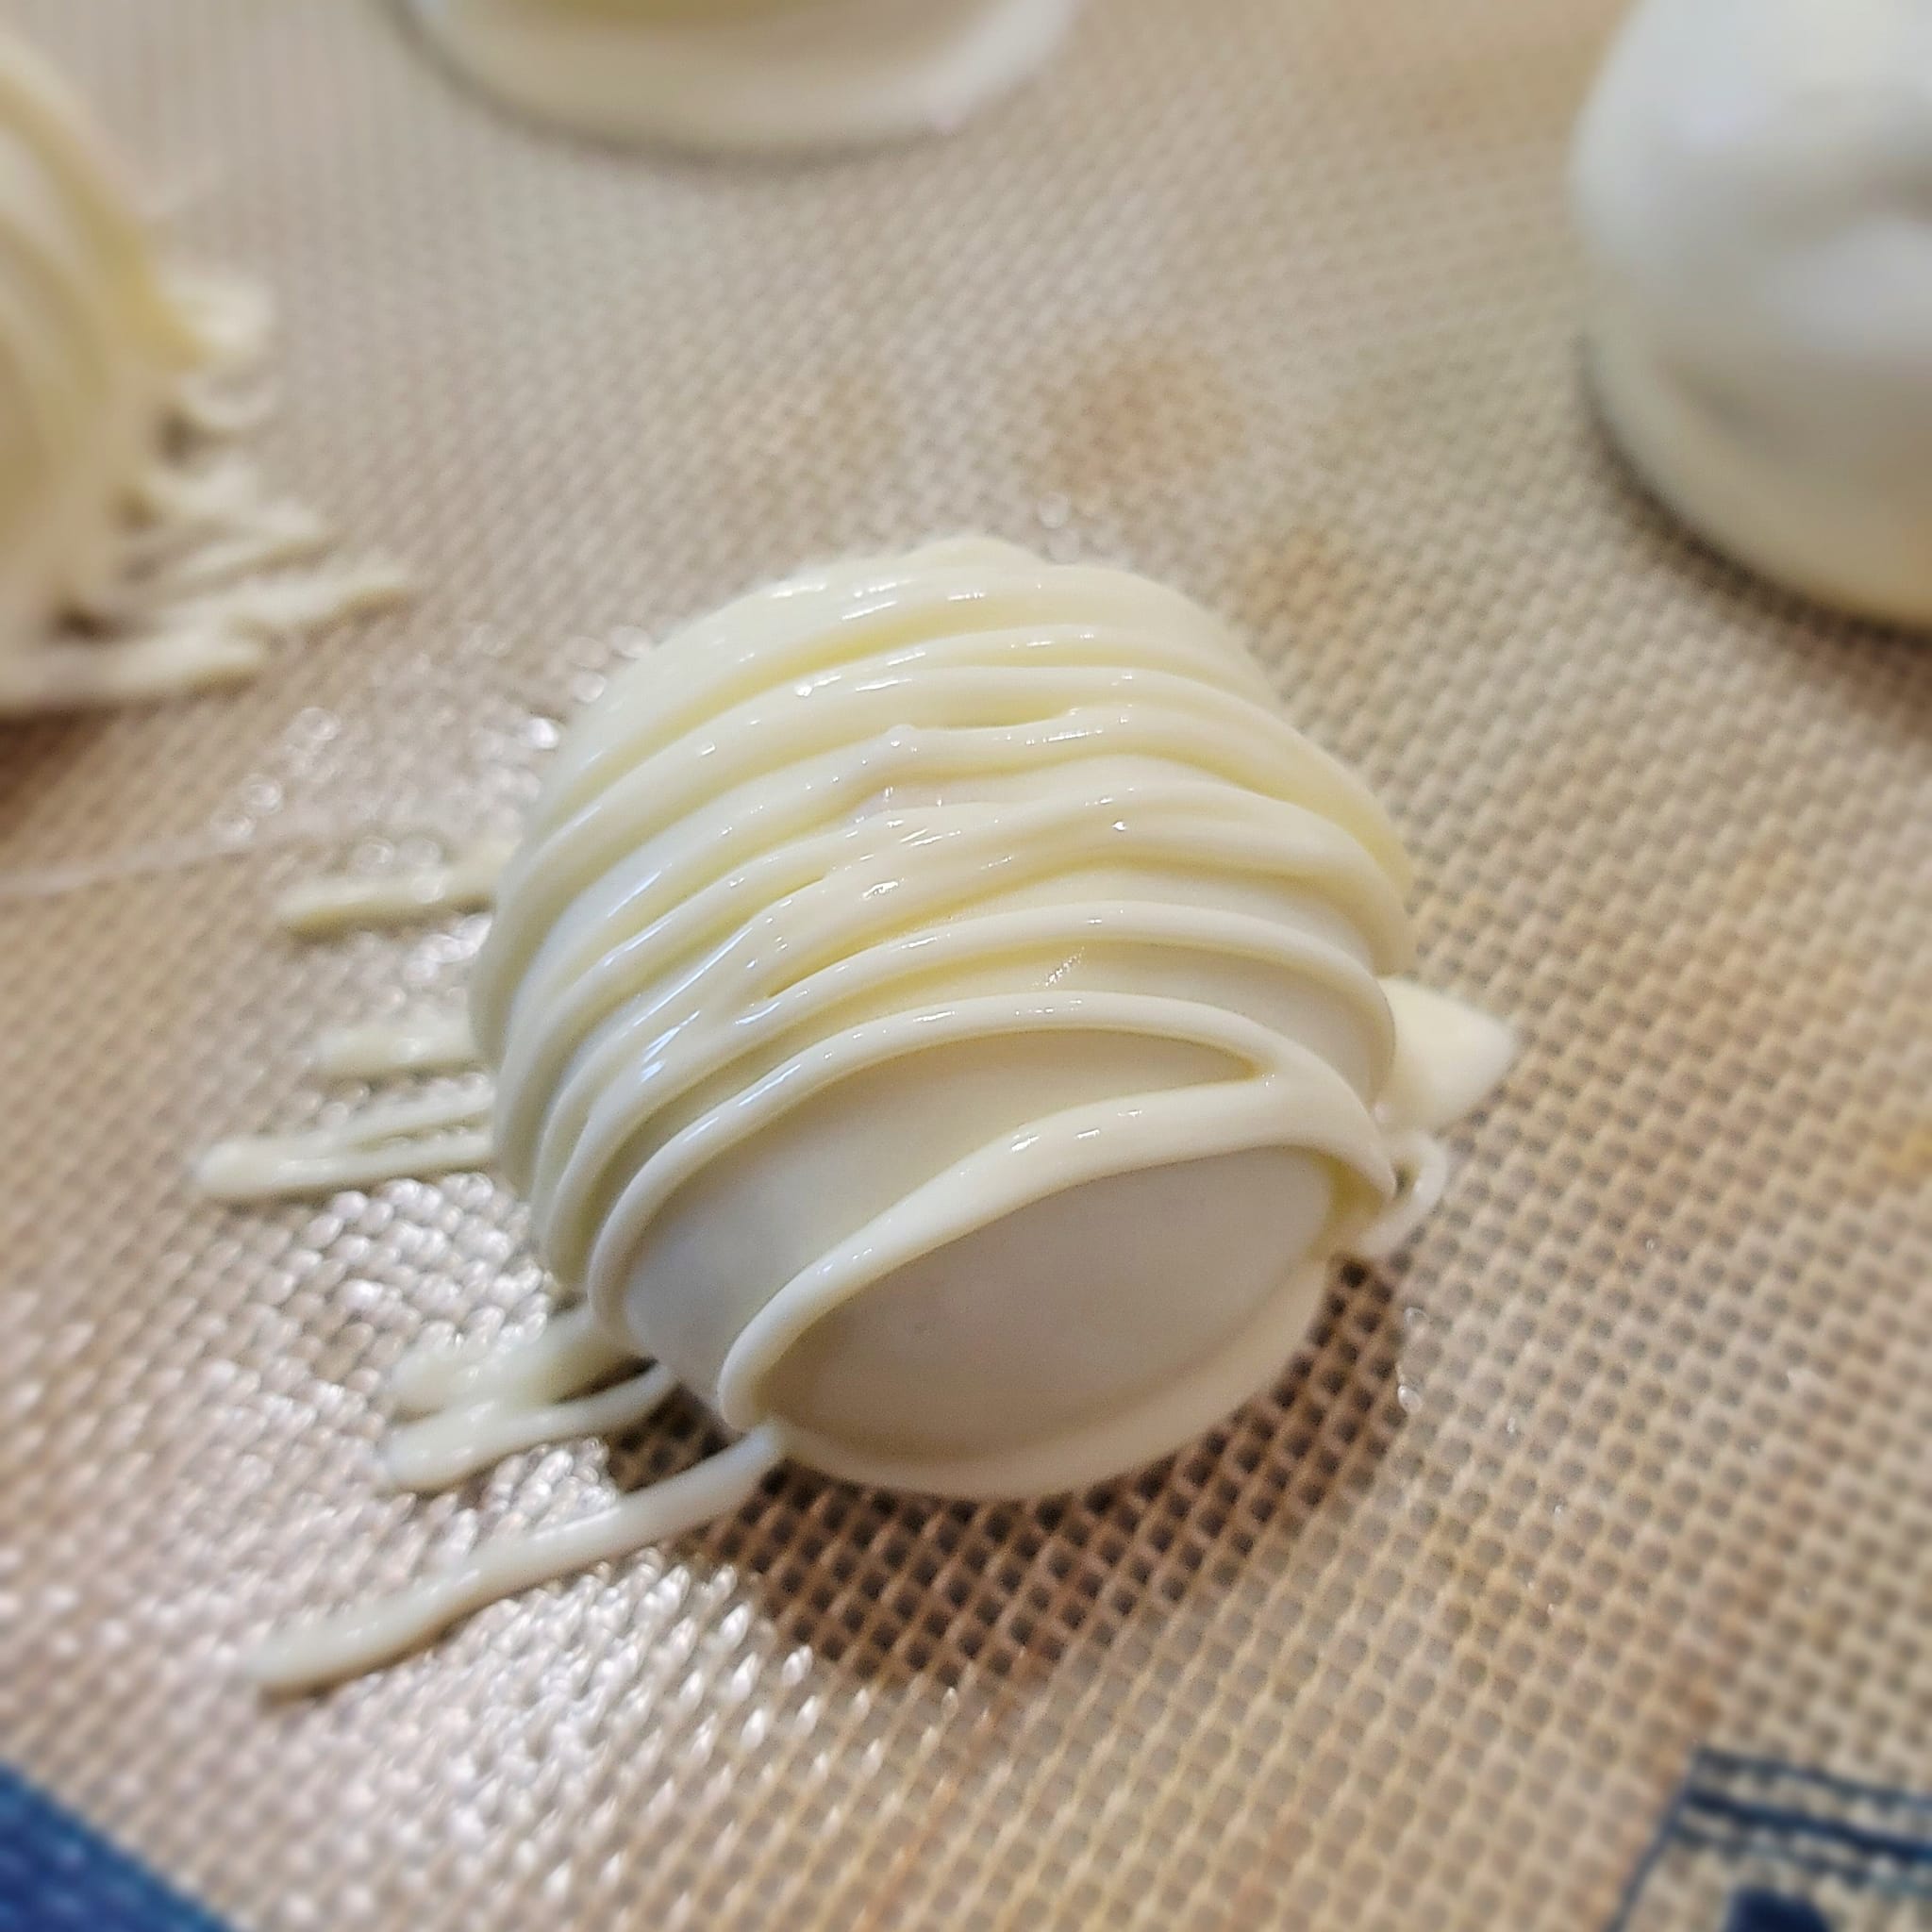 carrot cake ball covered in melting white chocolate with white chocolate drizzle